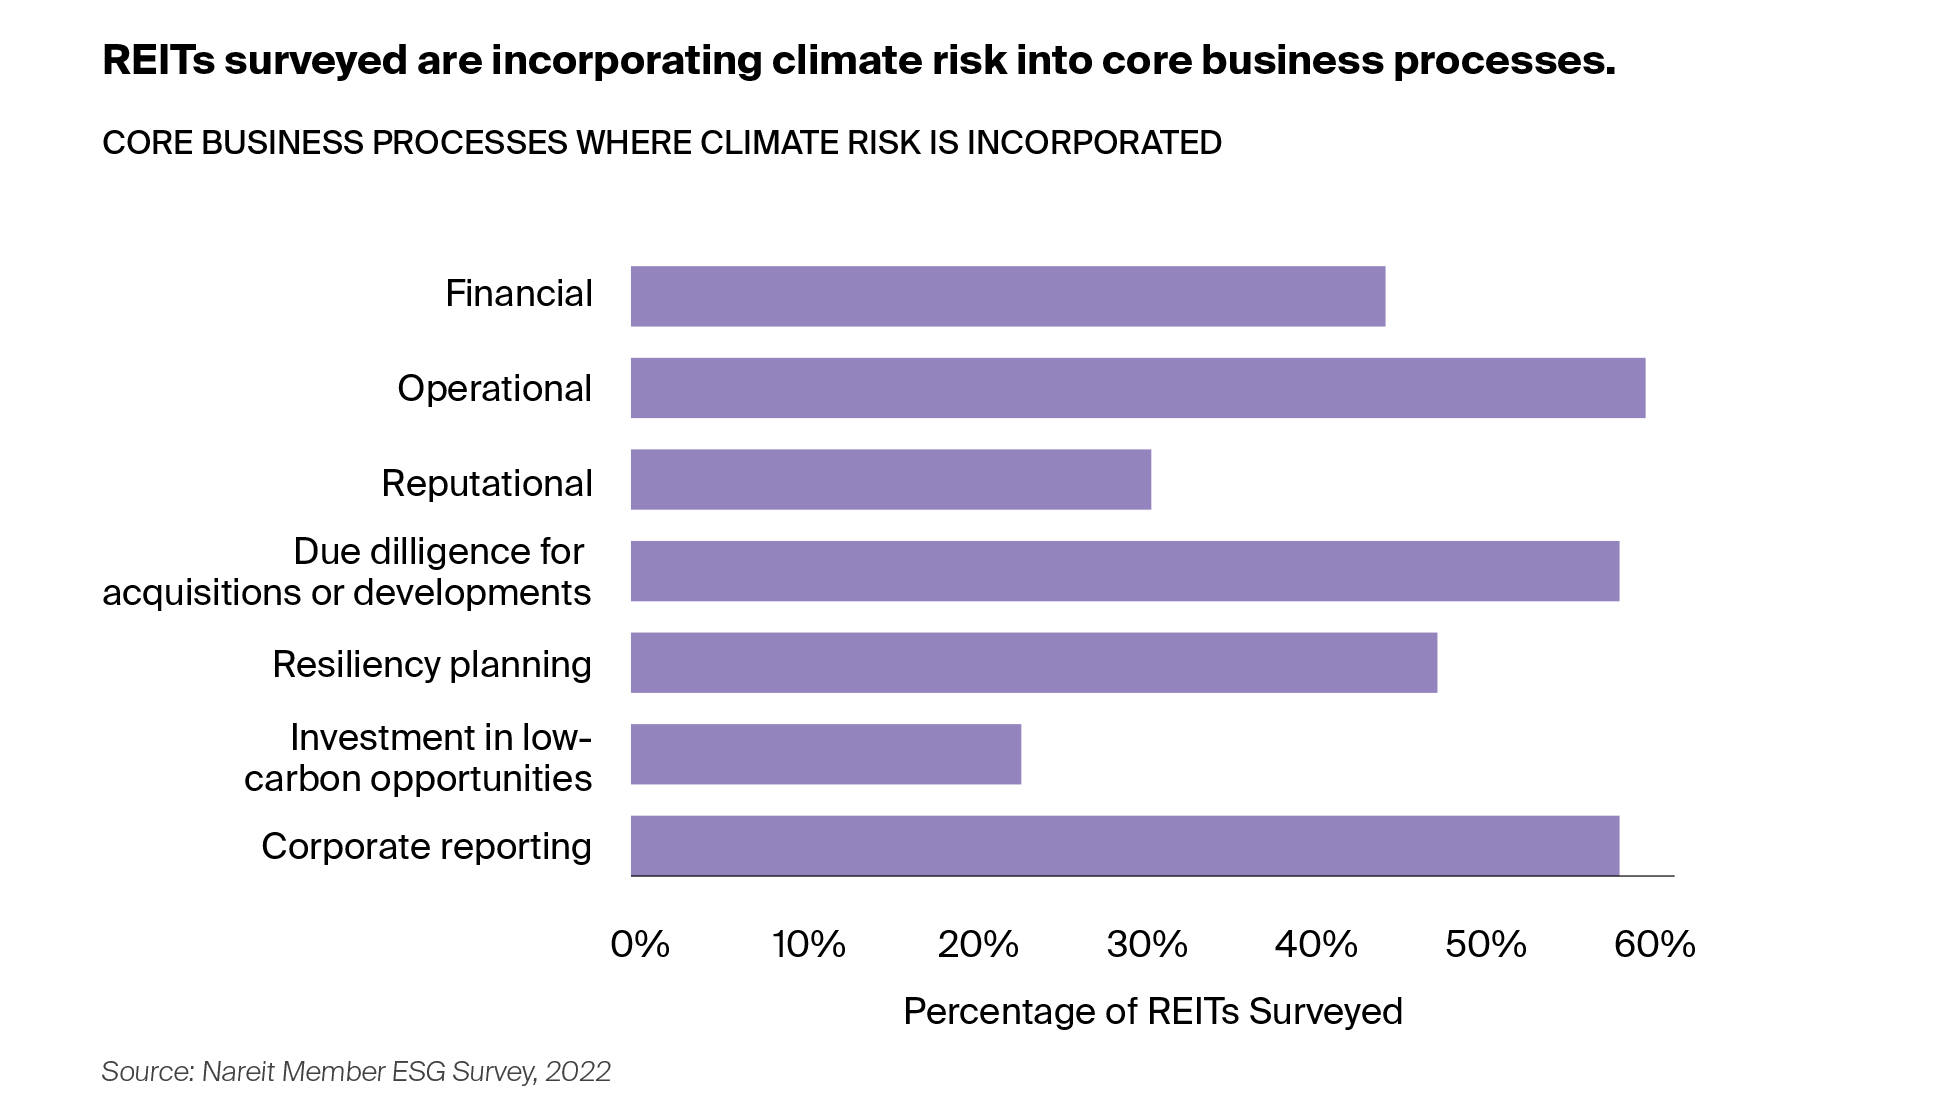 REITs incorporate climate risk into core business processes